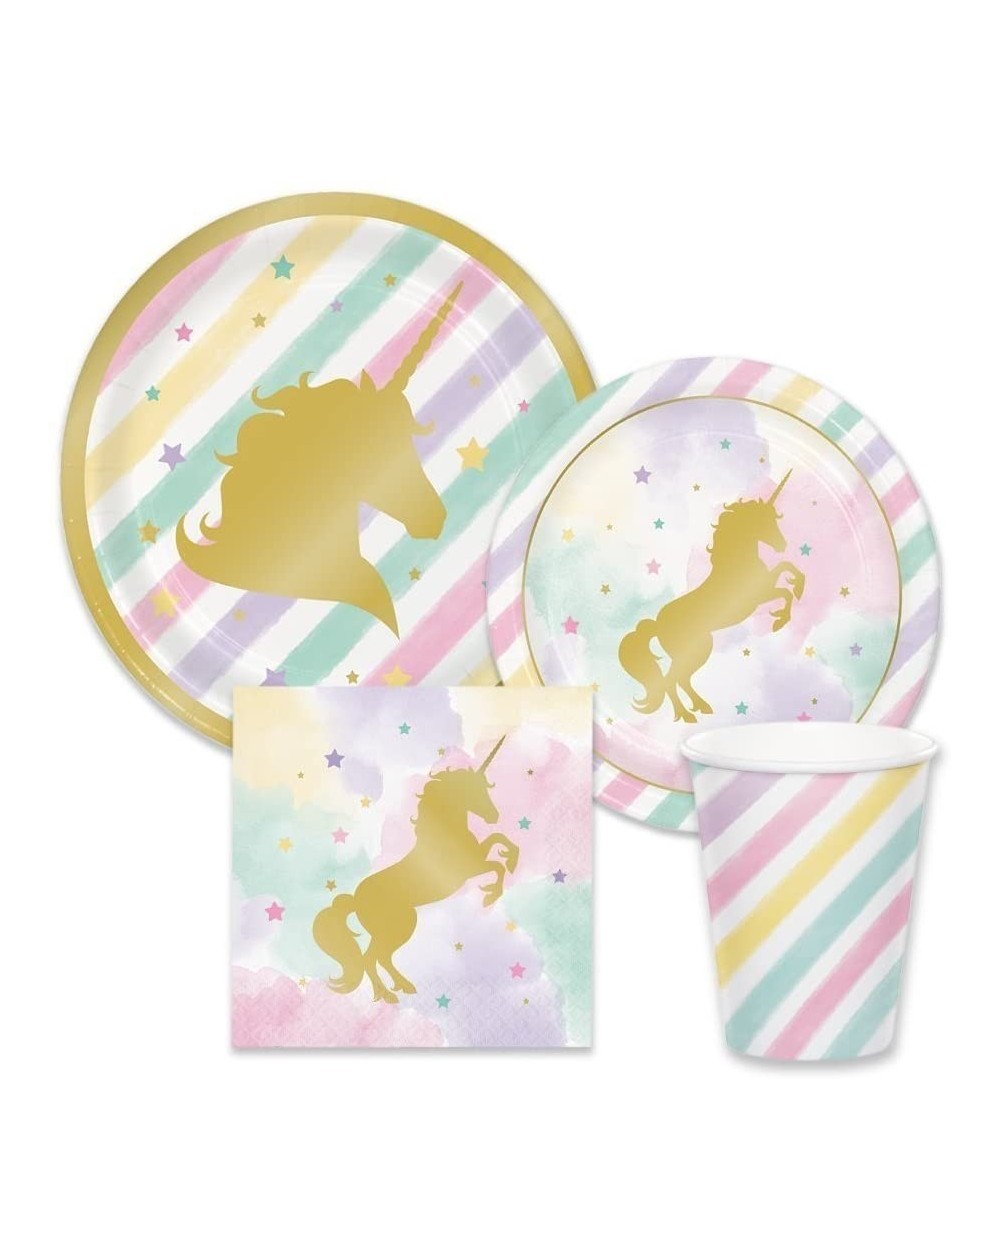 Party Tableware Unicorn Pink & Metallic Gold Sparkle Party Supplies - Tableware for 16 Guests - Plates- Napkins- & Cups - CQ1...